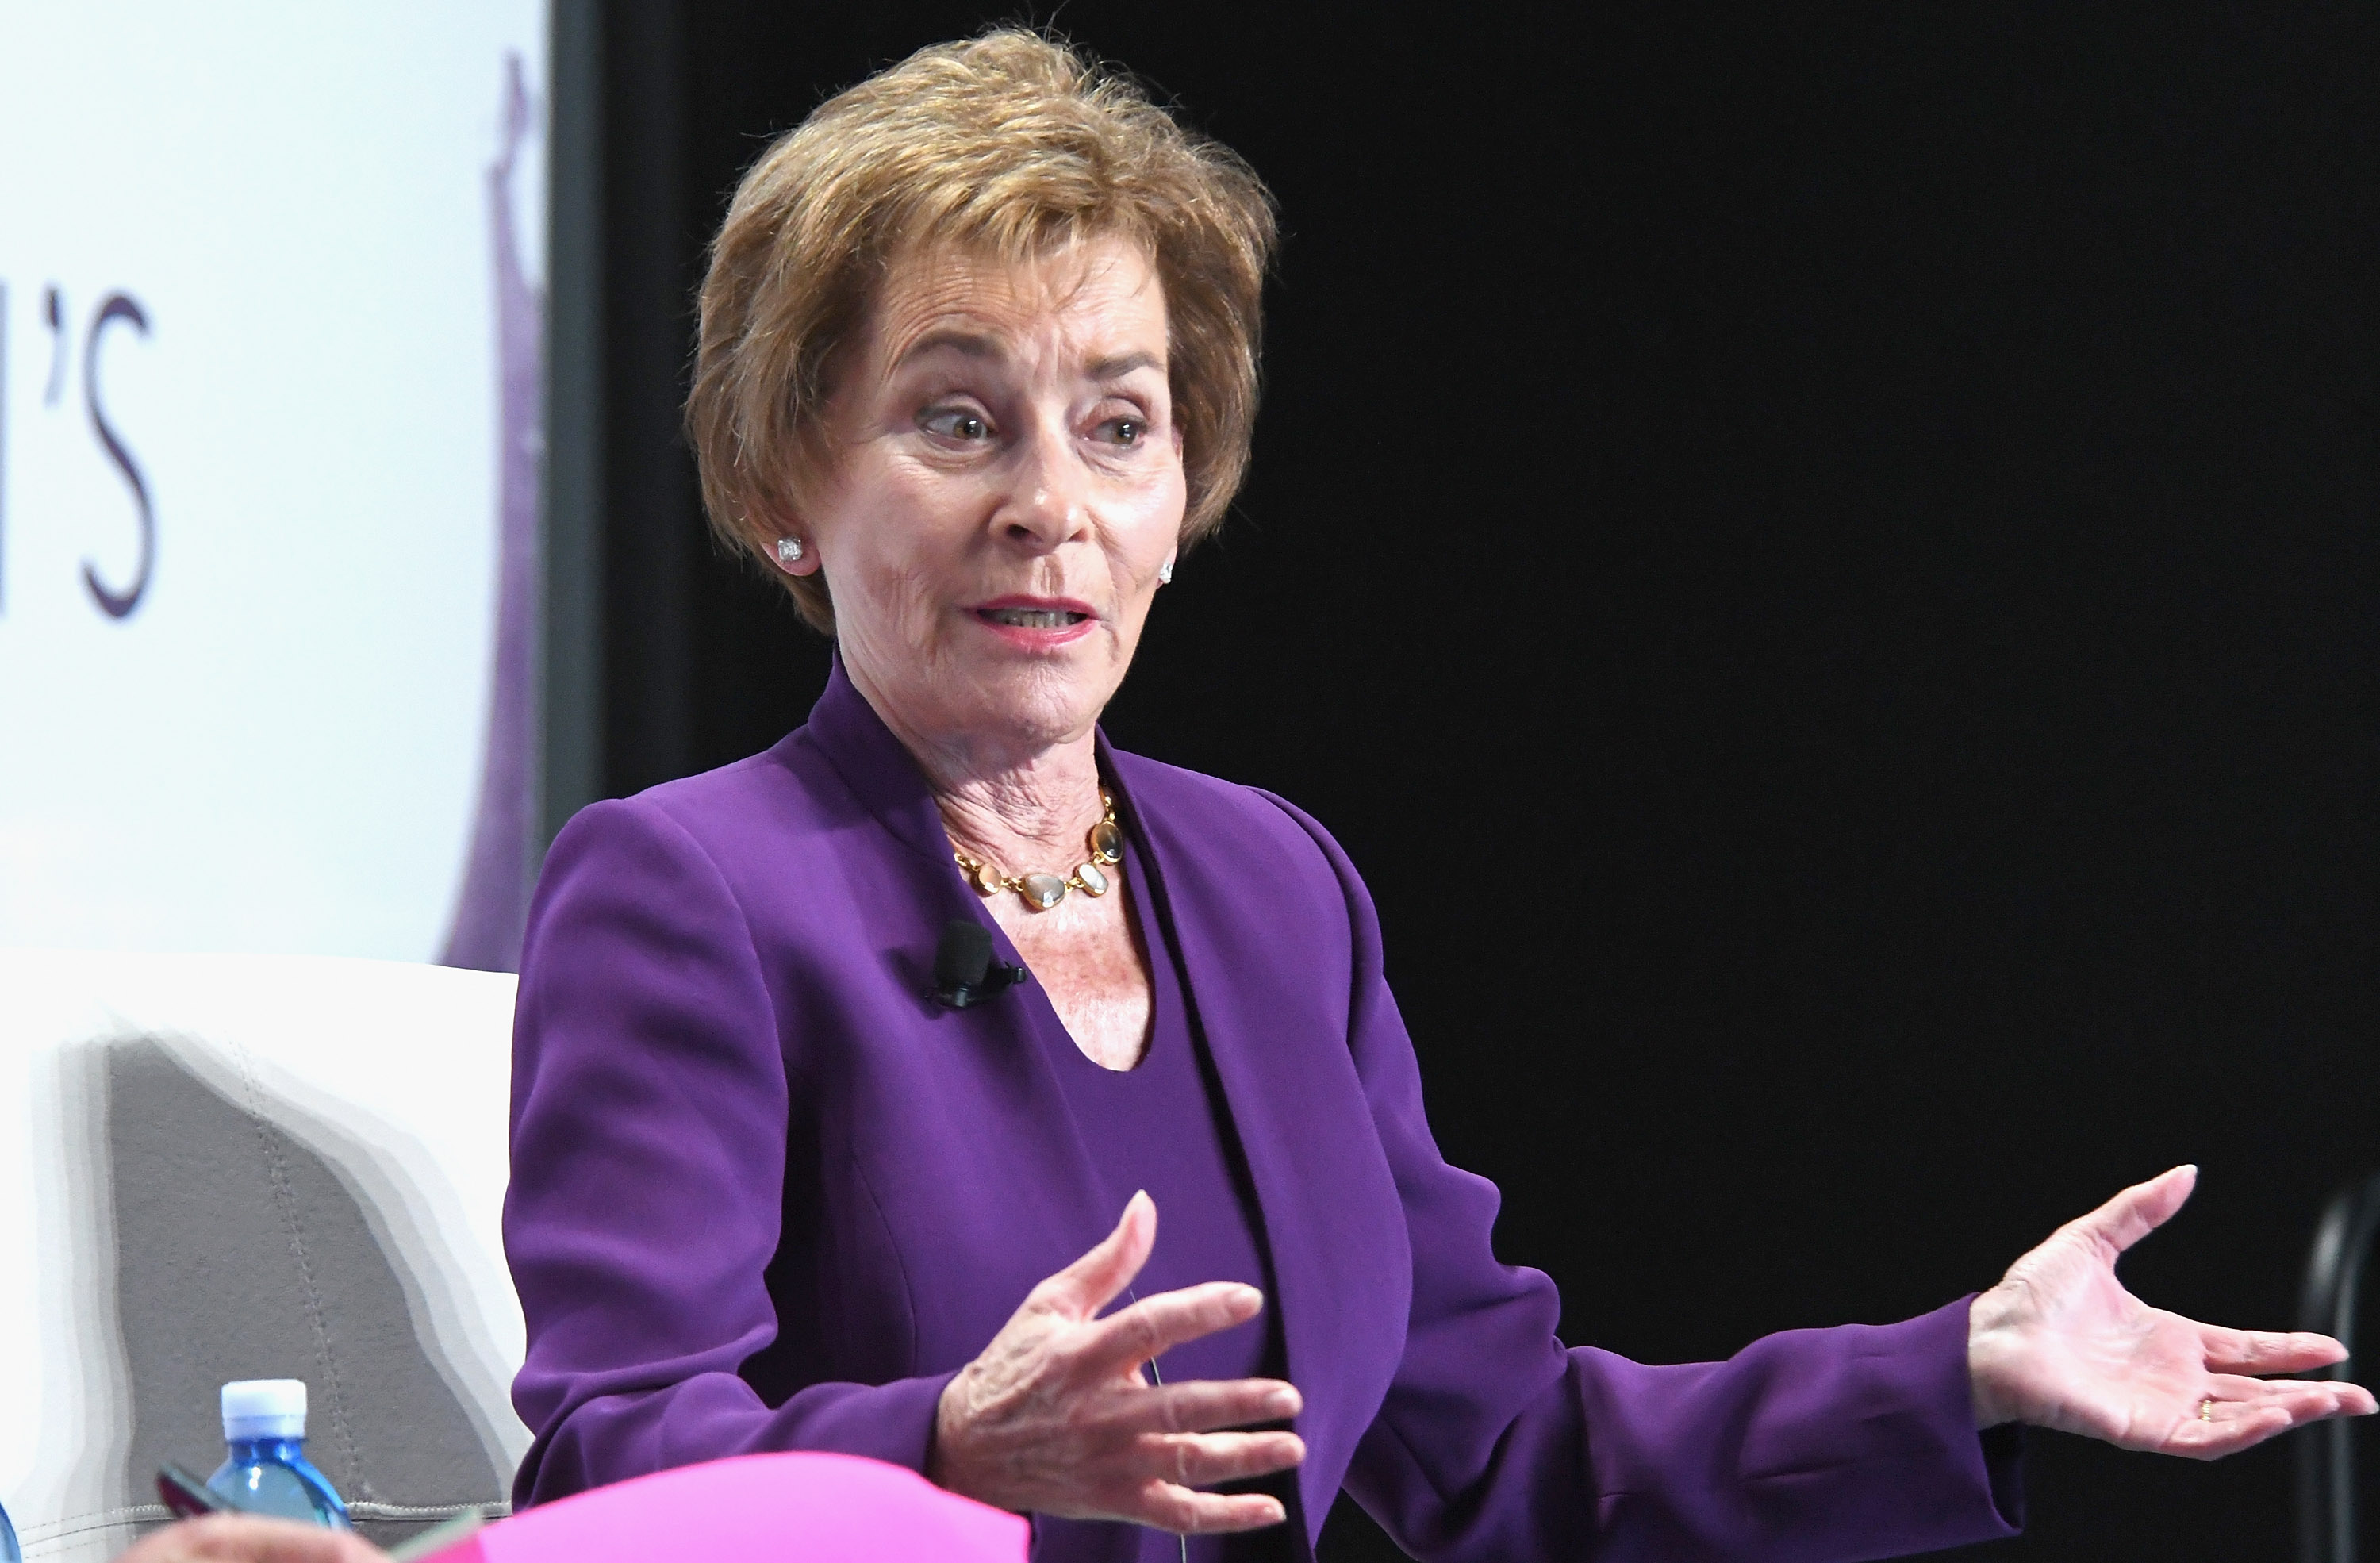 Judge Judy Sheindlin speaks on stage during the 2017 Forbes Women's Summit at Spring Studios on June 13, 2017, in New York City. | Source: Getty Images